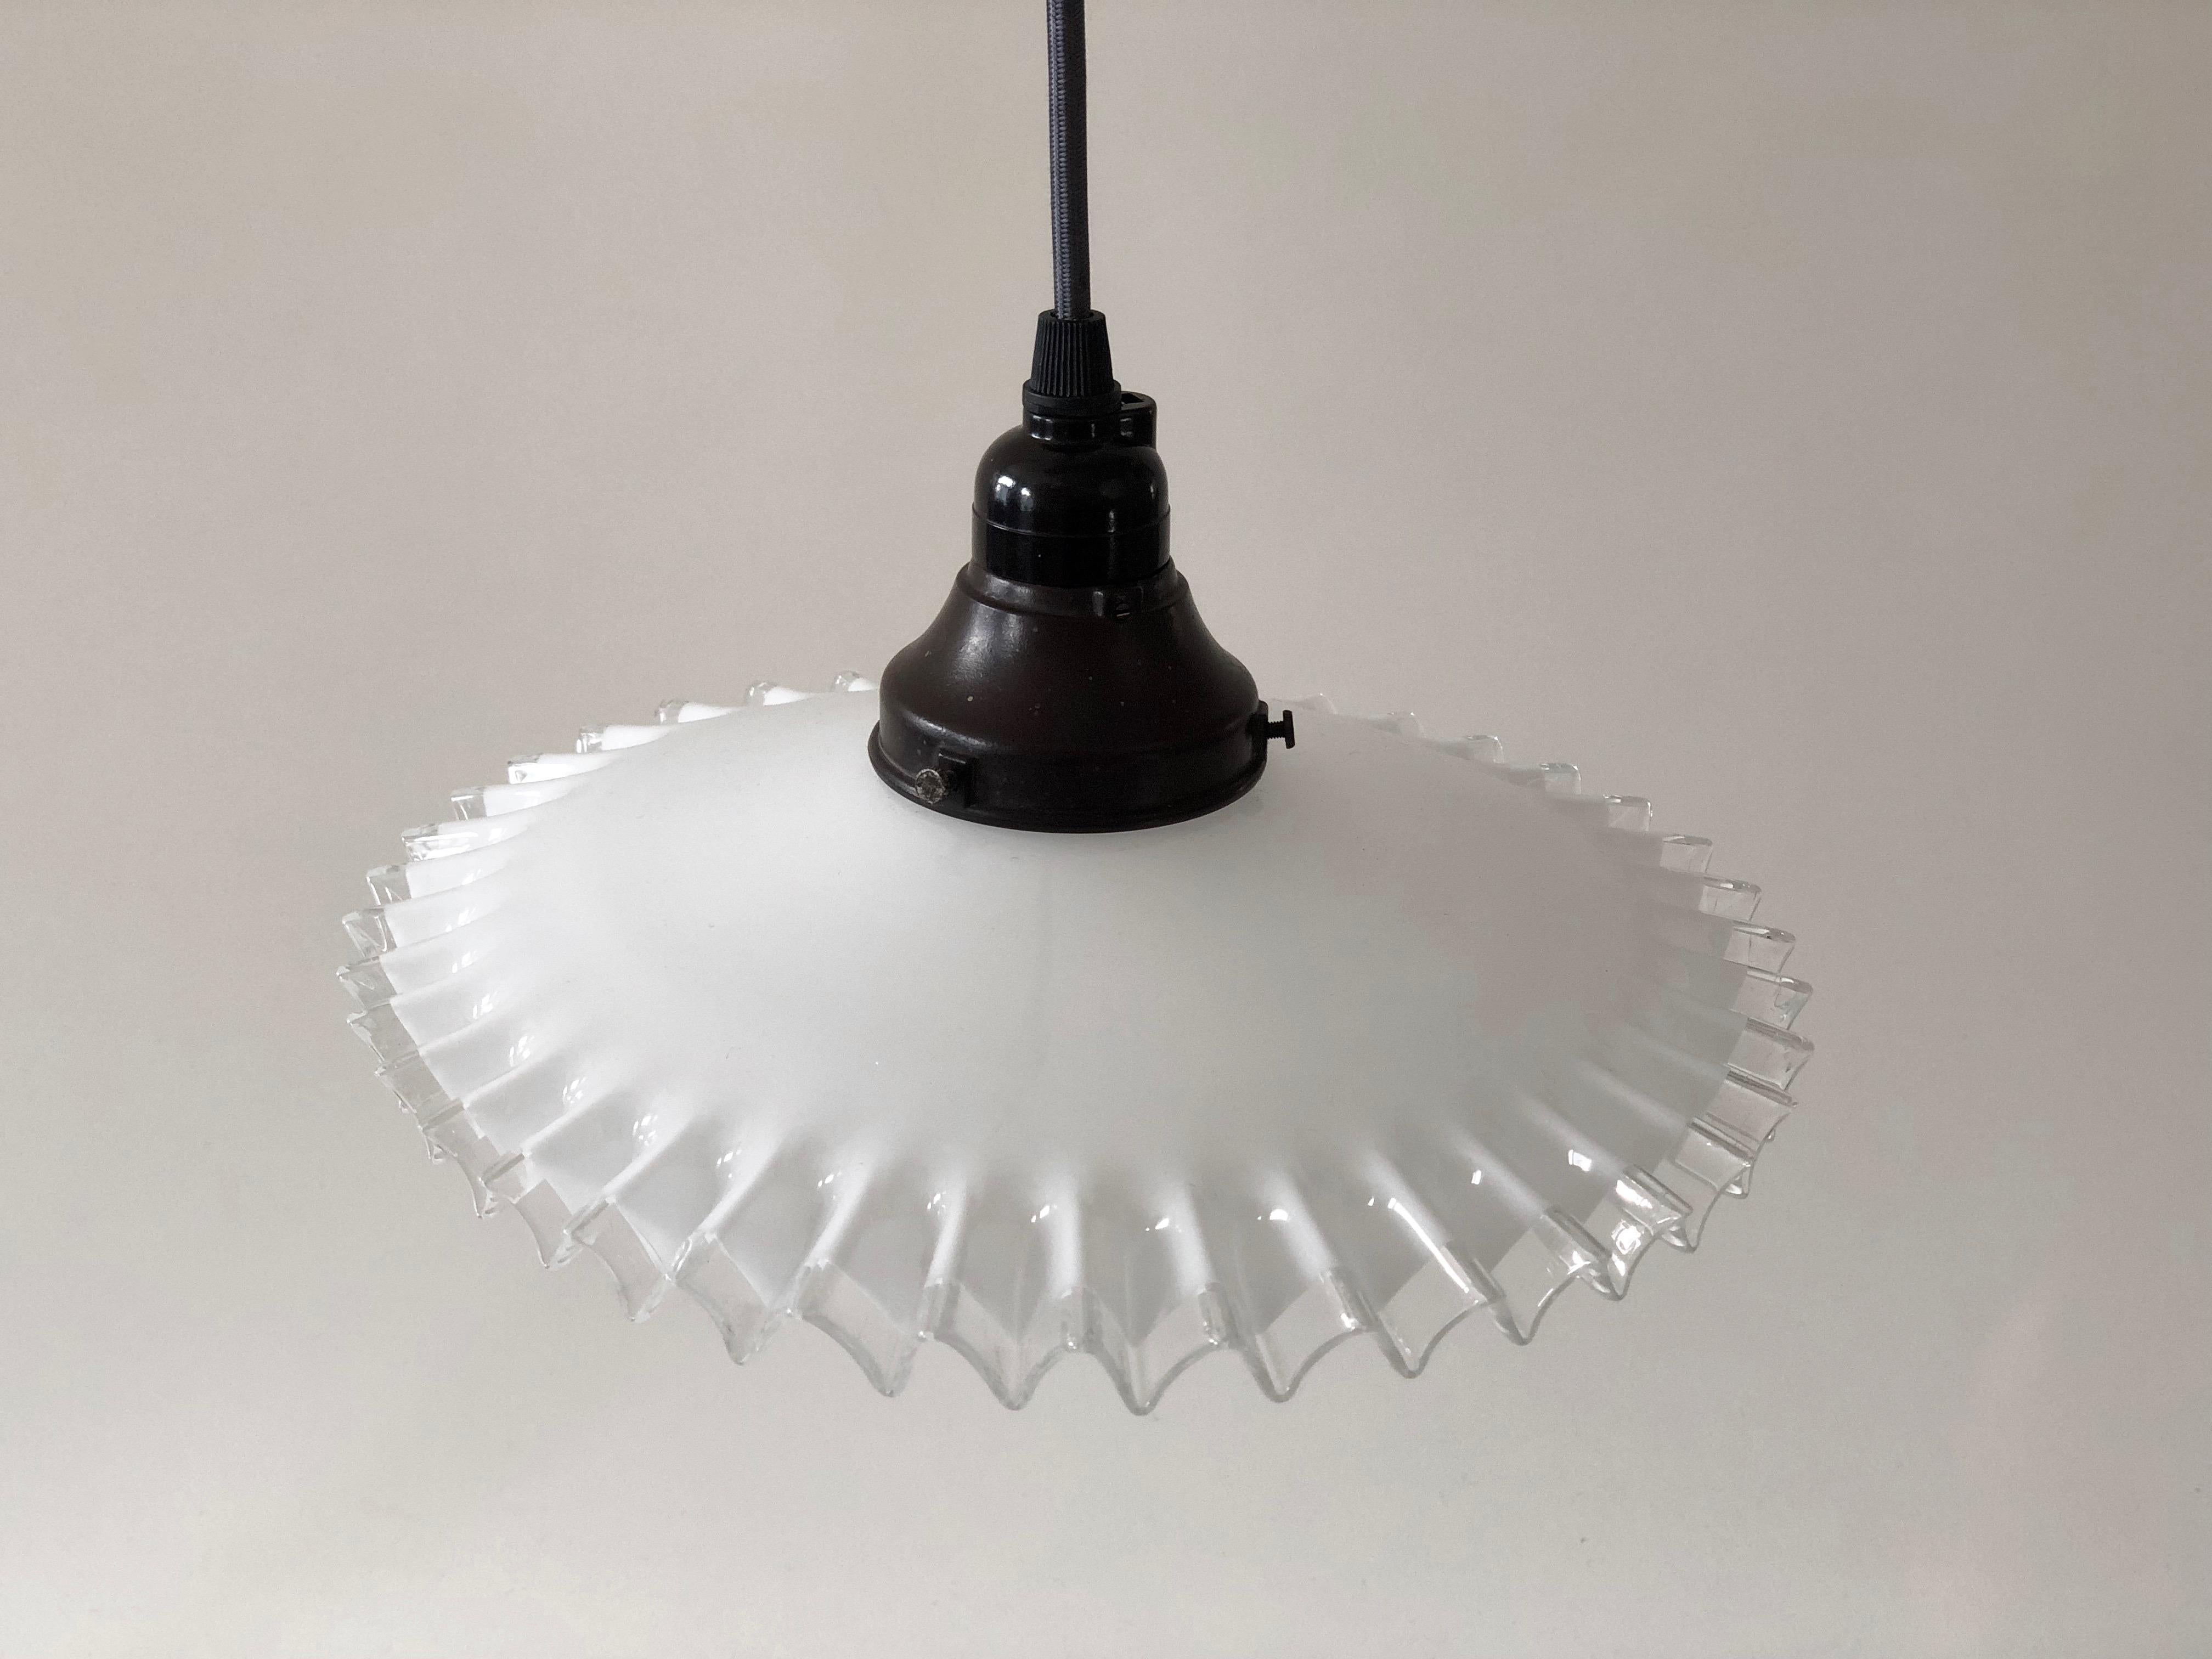 Counterweight Pendant Lamp, 1900, Made from Porcelain and Handmade Glass For Sale 3